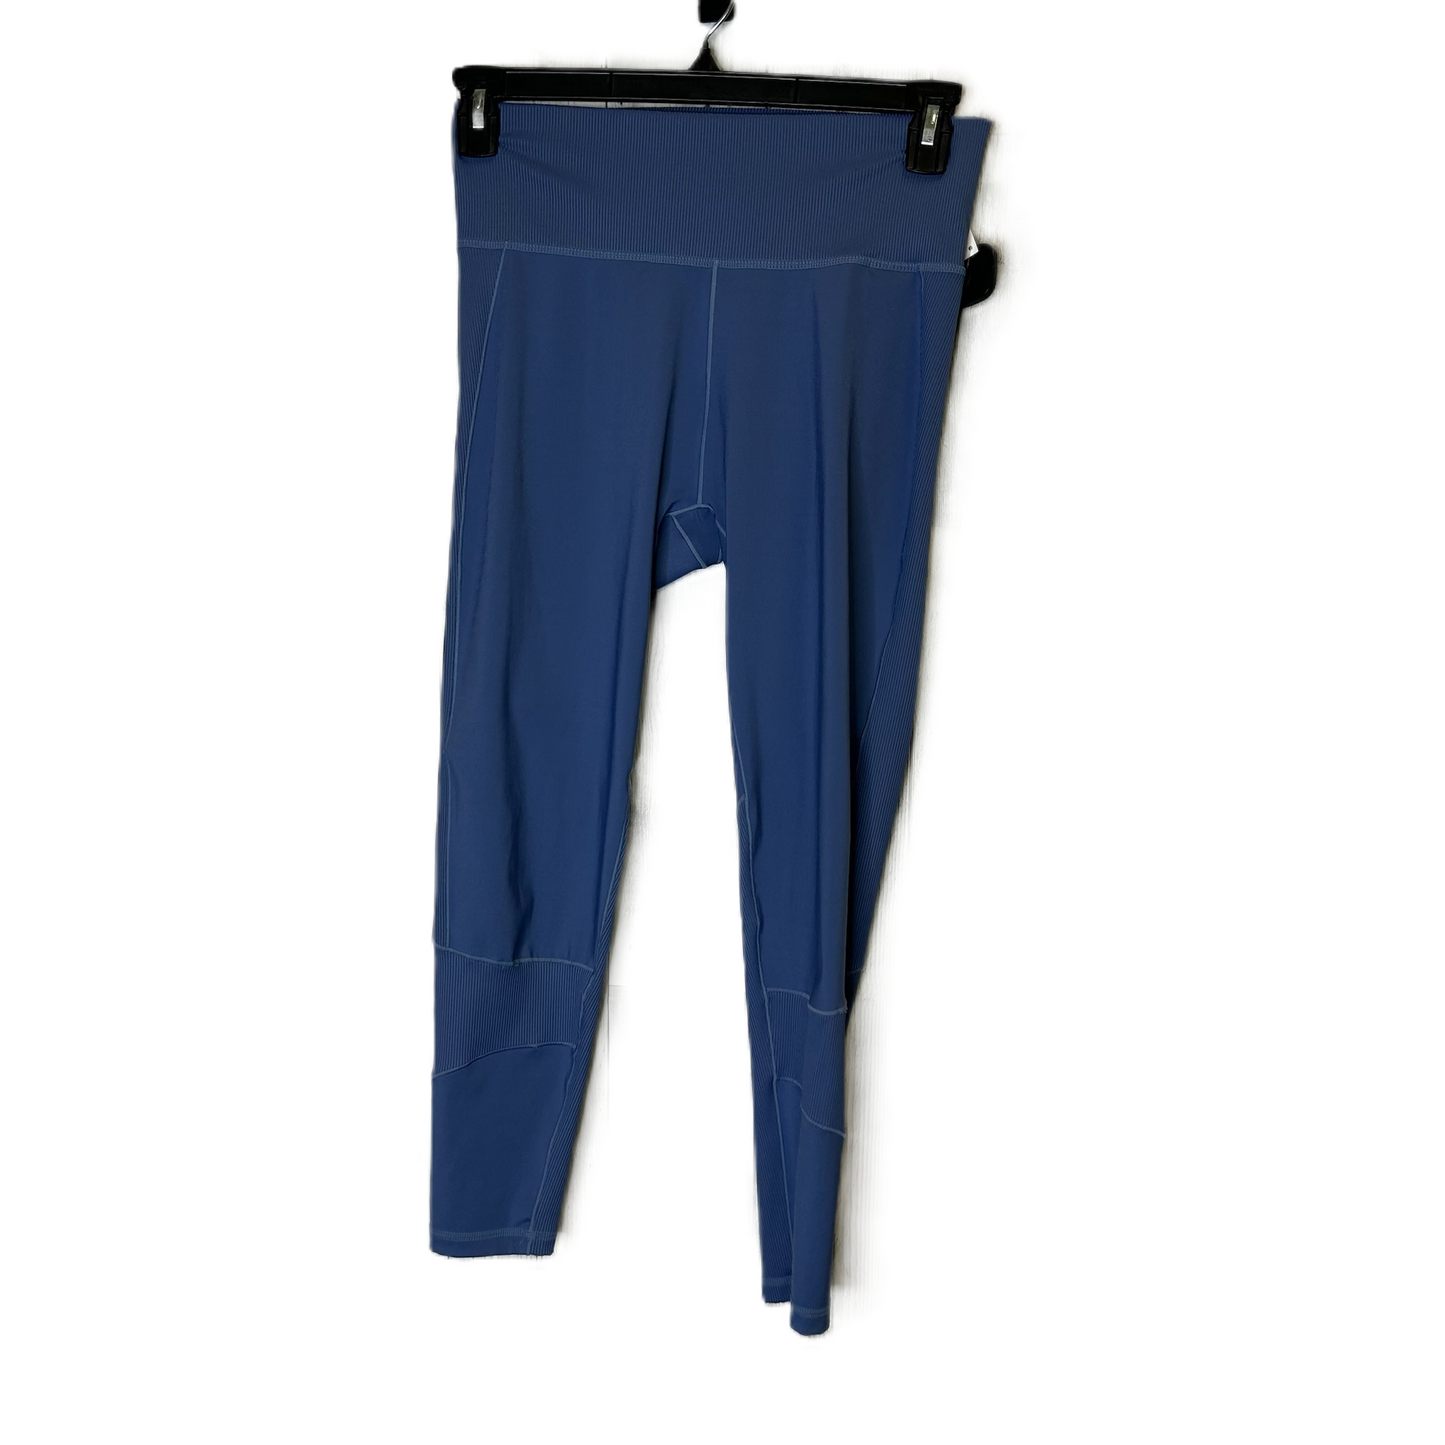 Blue Athletic Leggings By Adidas, Size: L